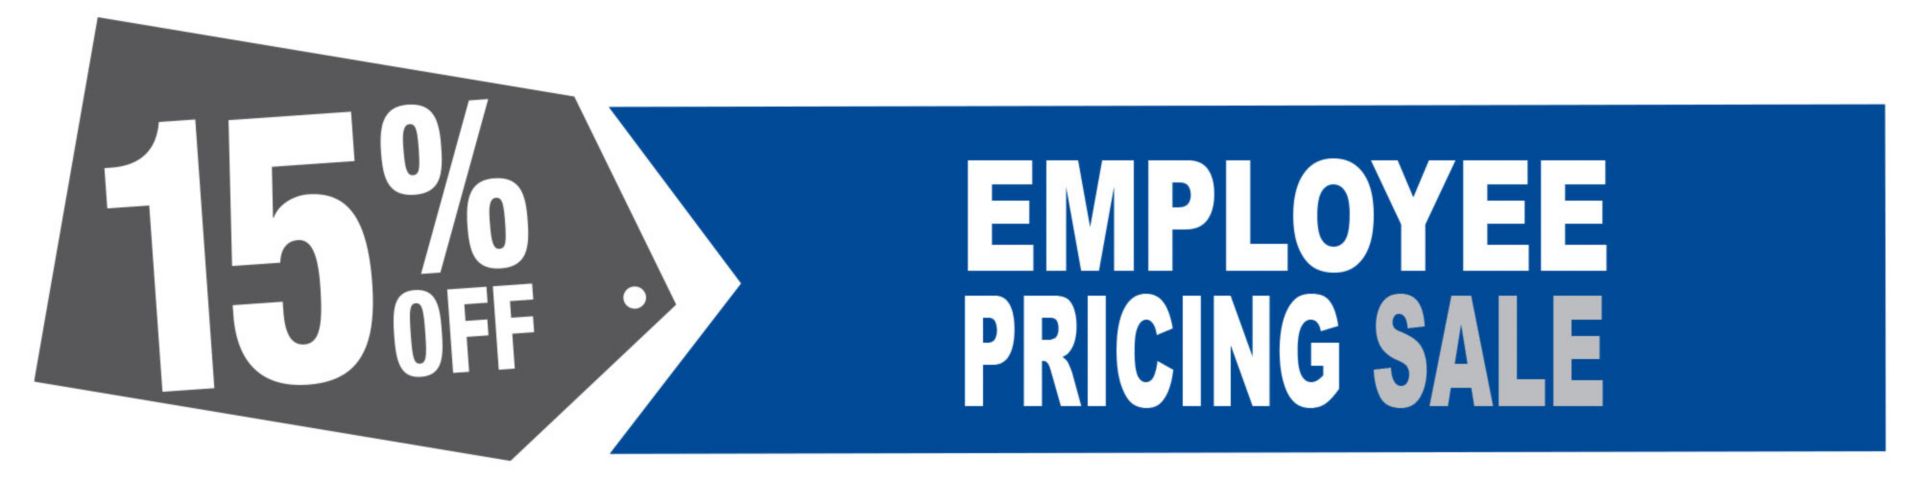 15 Percent Off Employee Pricing Sale